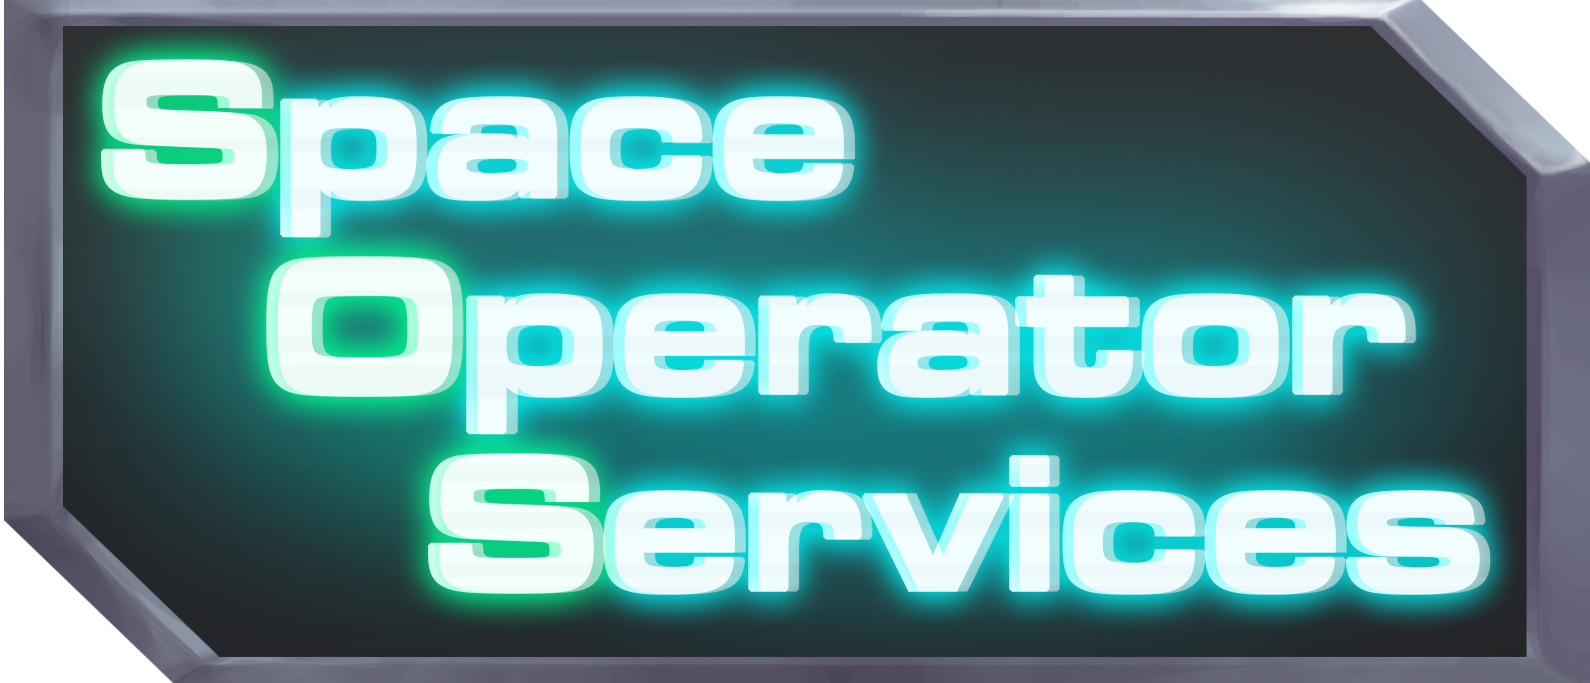 Space Operator Services